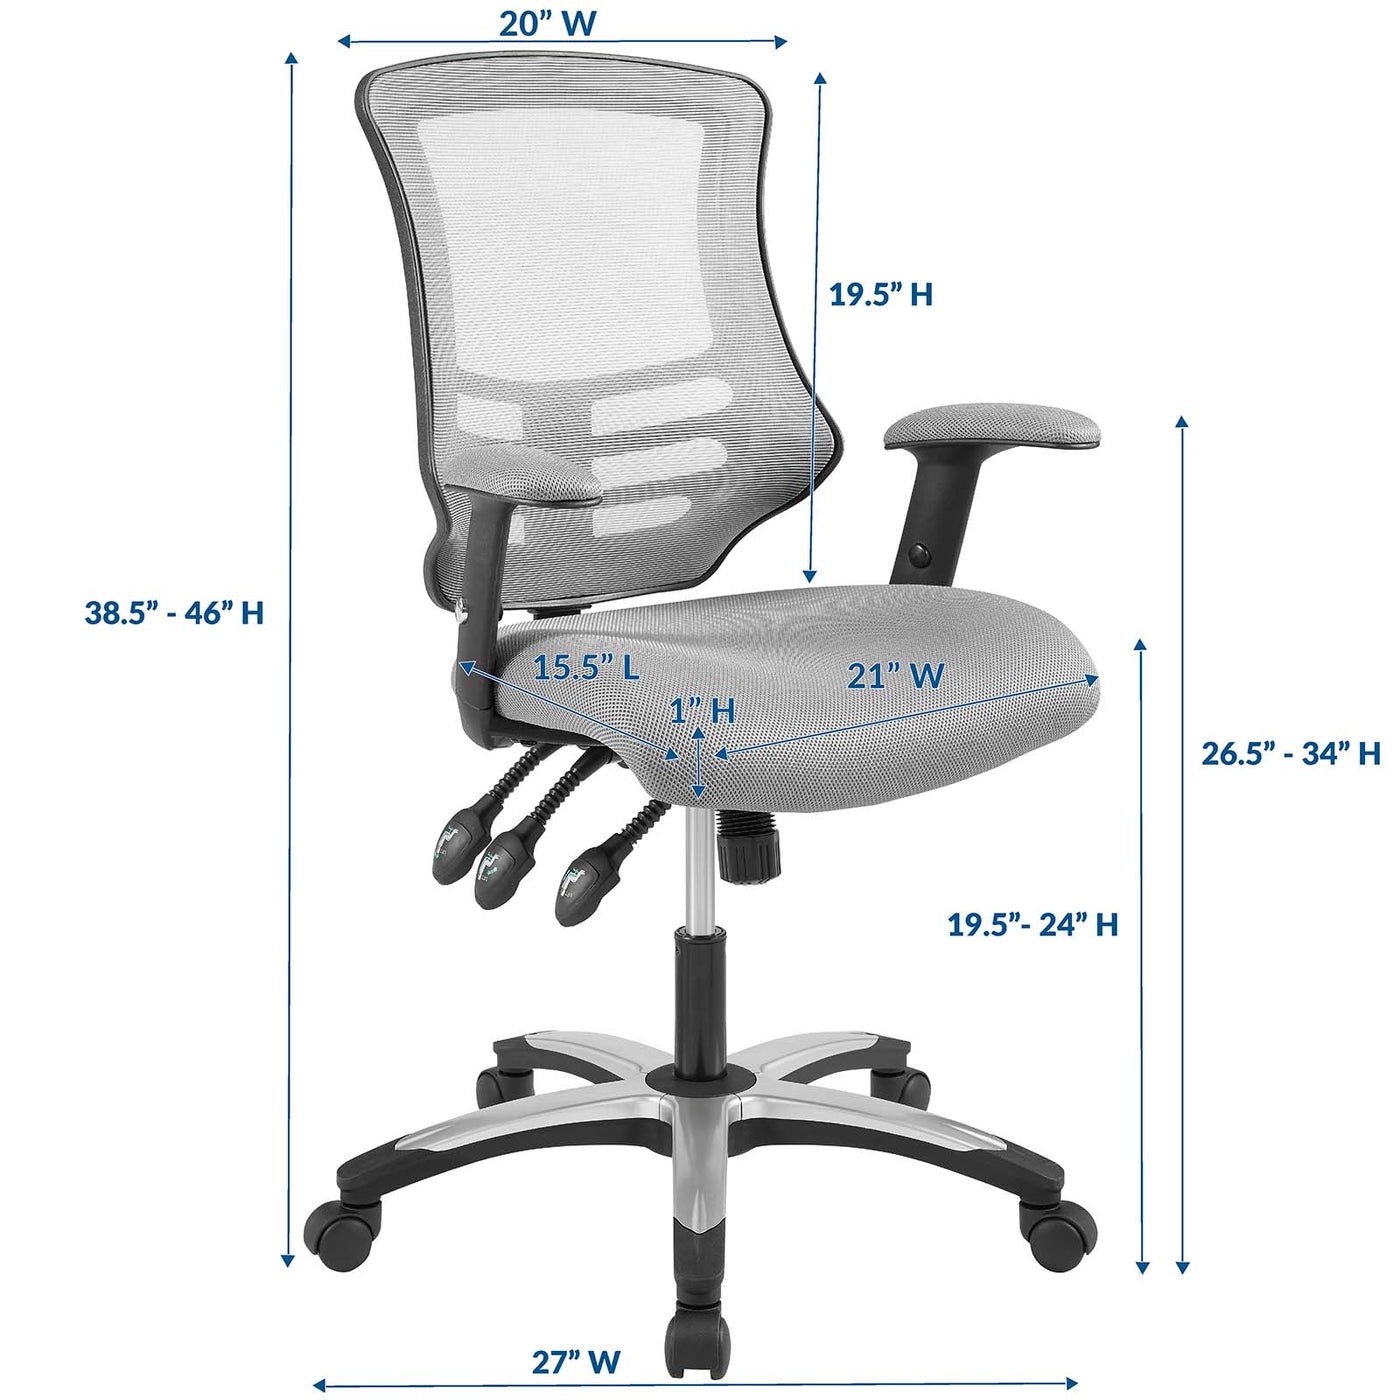 Calibrate Mesh Office Chair